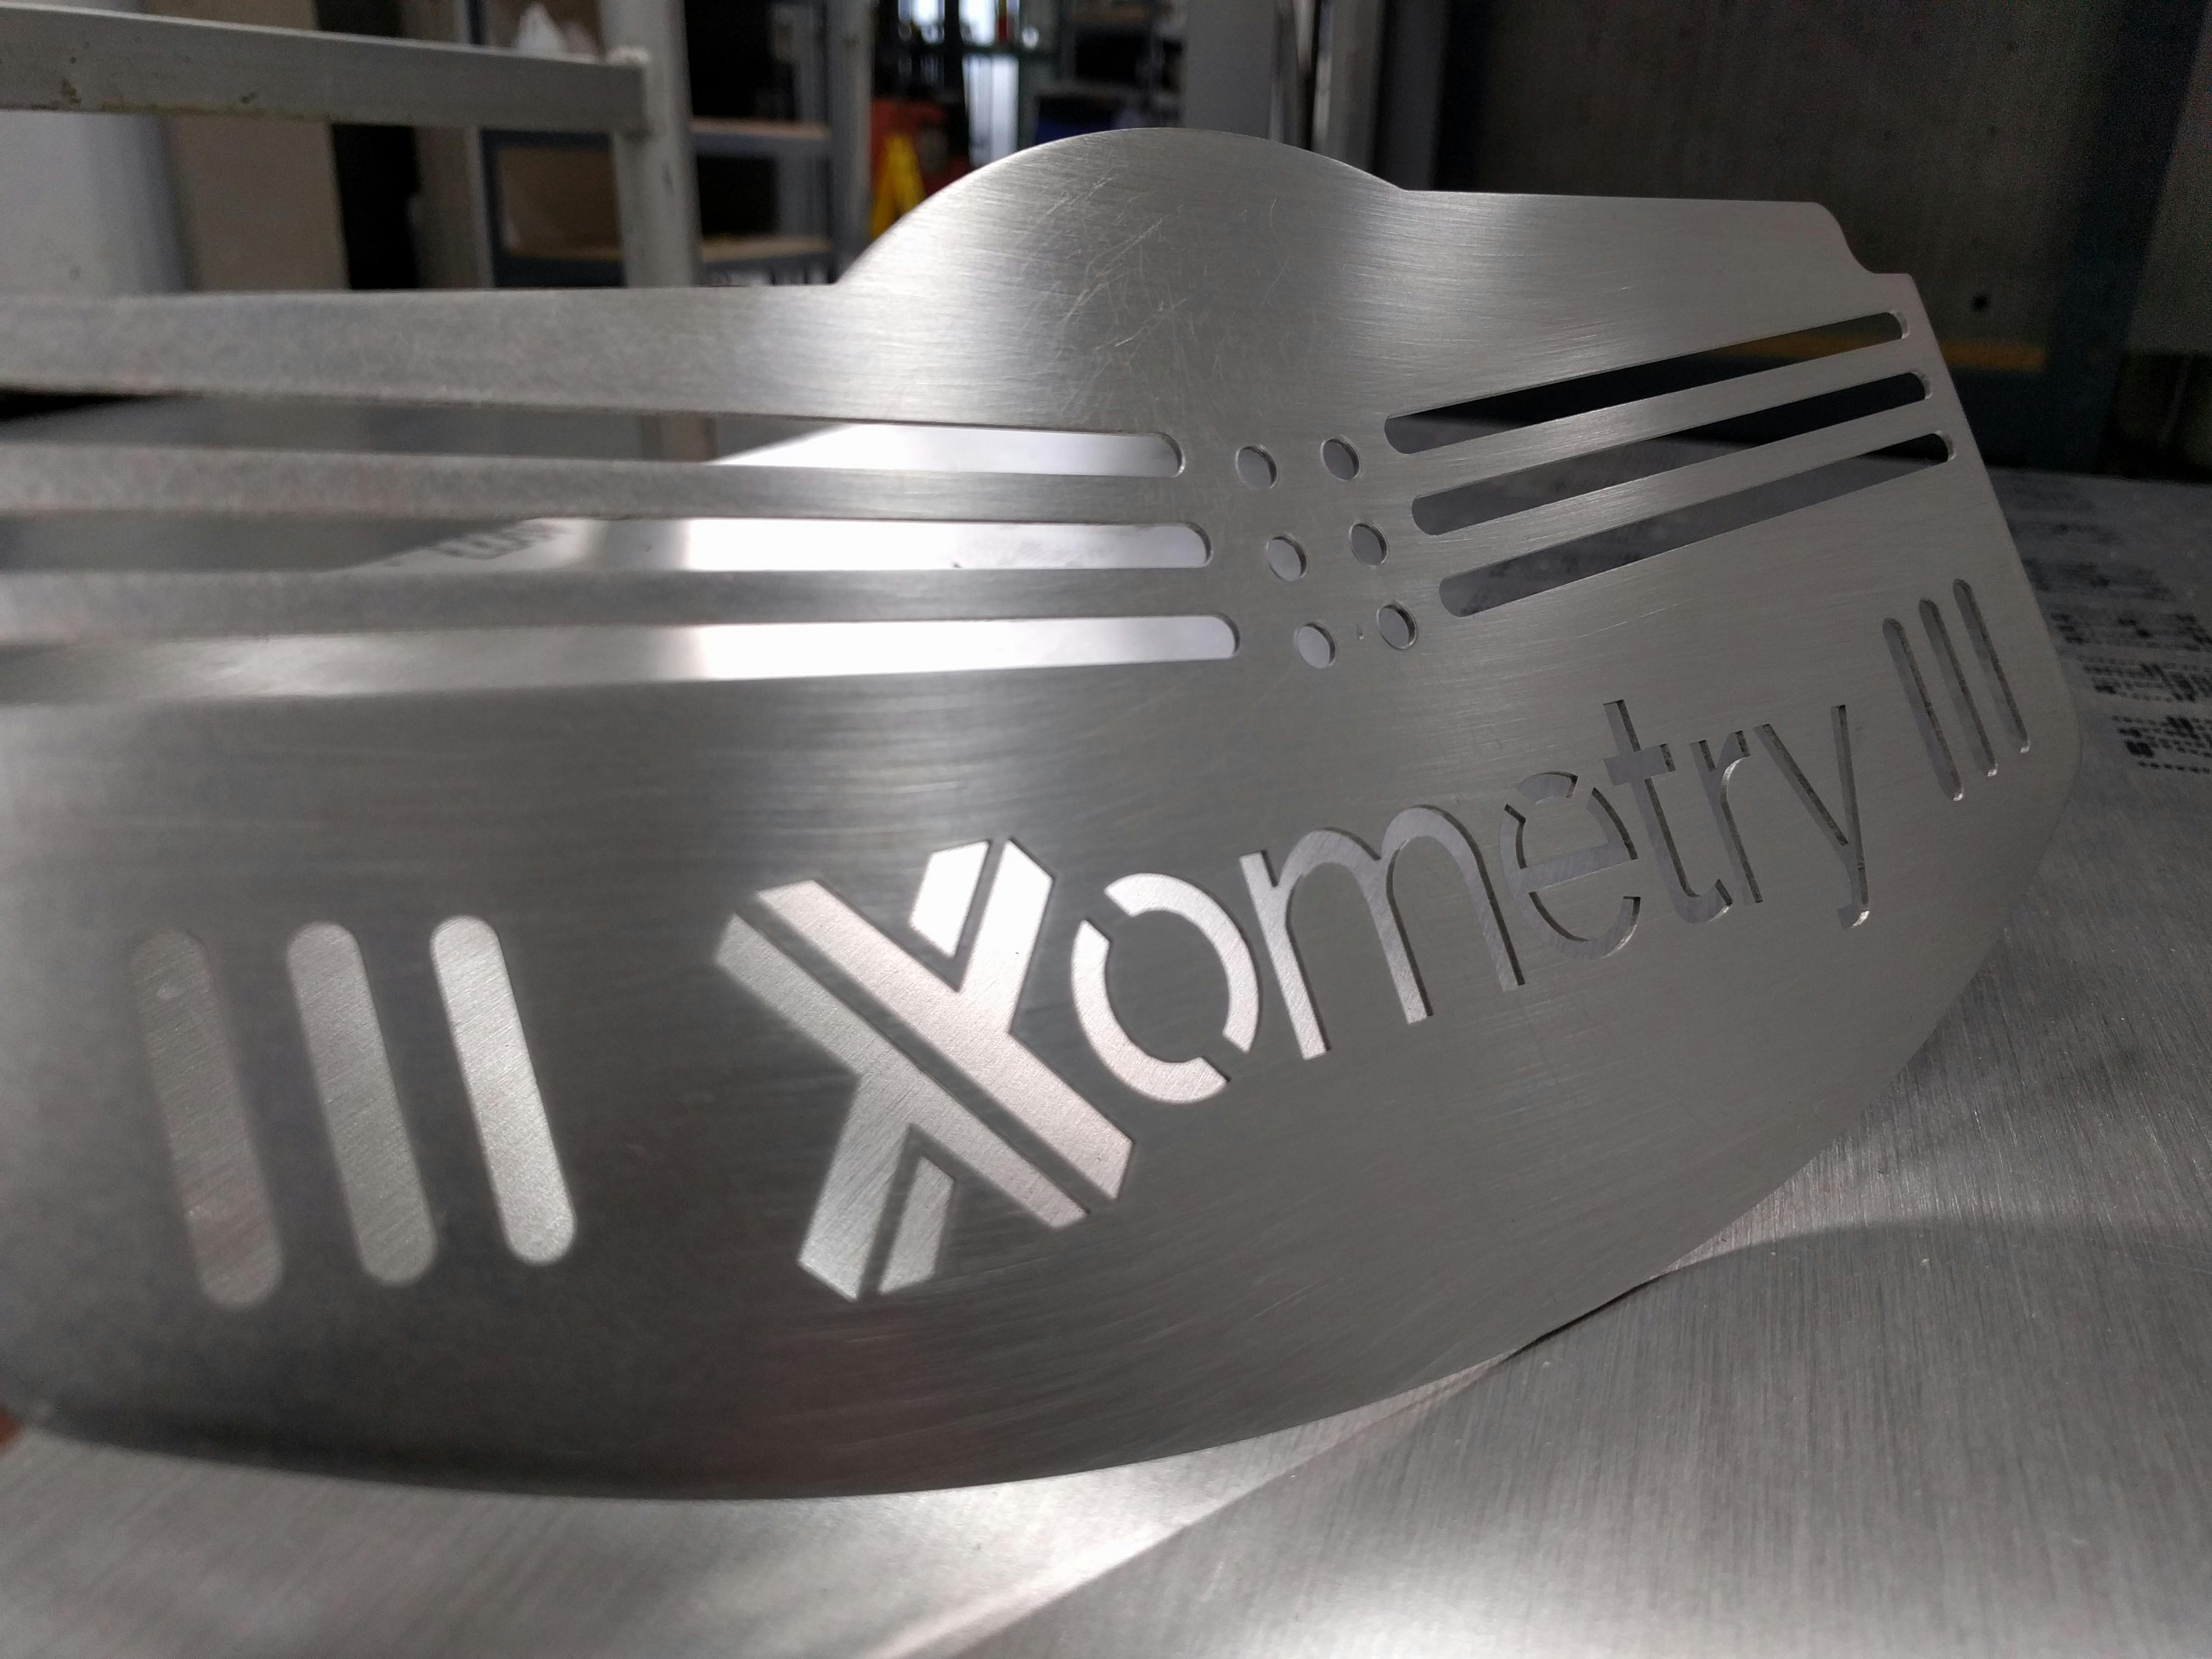 Sheet metal laser cut and punched plate with Xometry logo